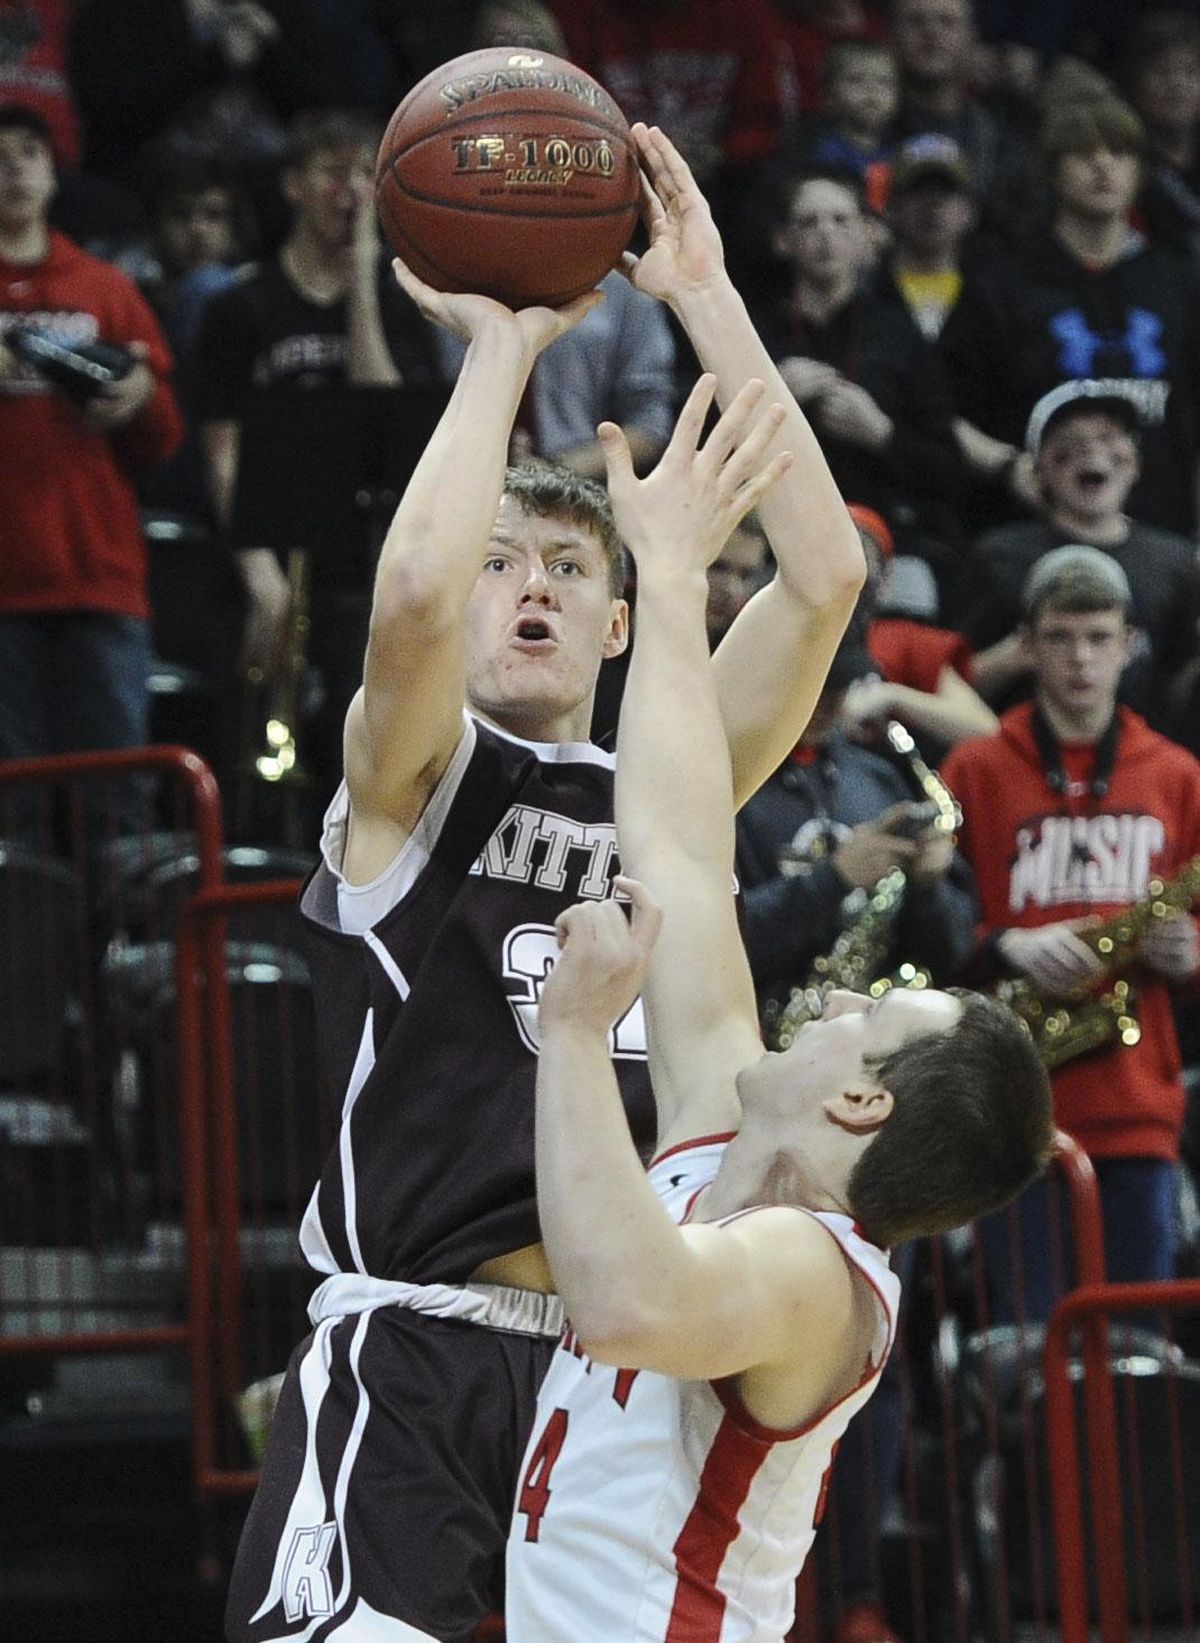 Kittitas guard Brock Ravet shoots over a Liberty defender in the State 2B championship game at the Spokane Arena. (Tyler Tjomsland / The Spokesman-Review)